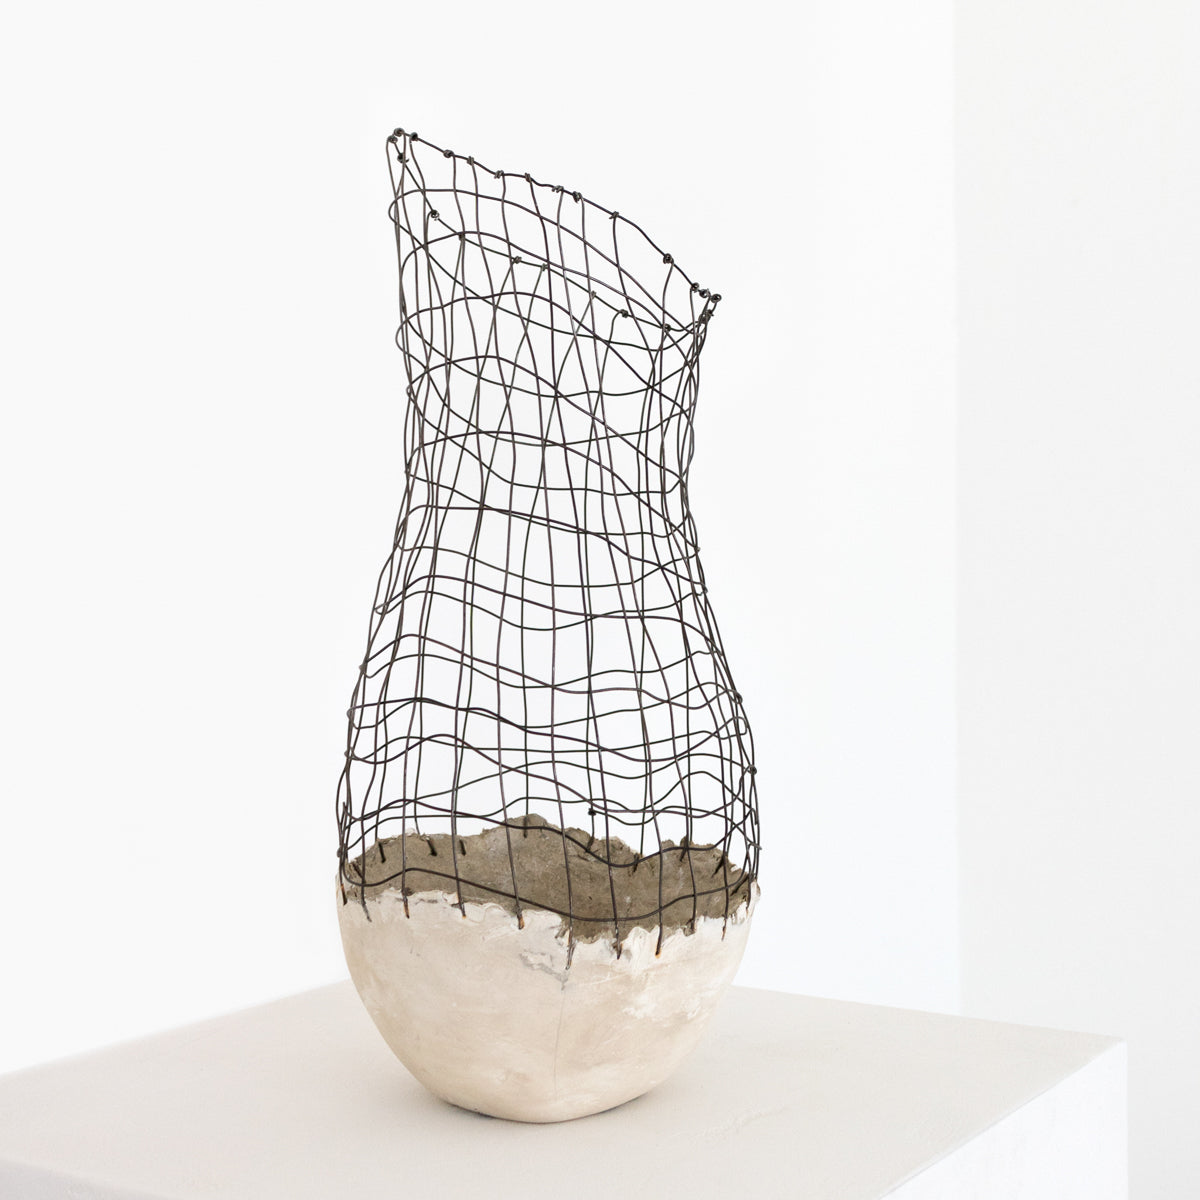 Handmade by artist Jennifer Alden Design, Vessel Study No. 40 is a contemporary sculpture made from paper clay, plaster, paint and wire. Each vessel in this collection is one-of-a-kind, rare, and both primitive and modern.